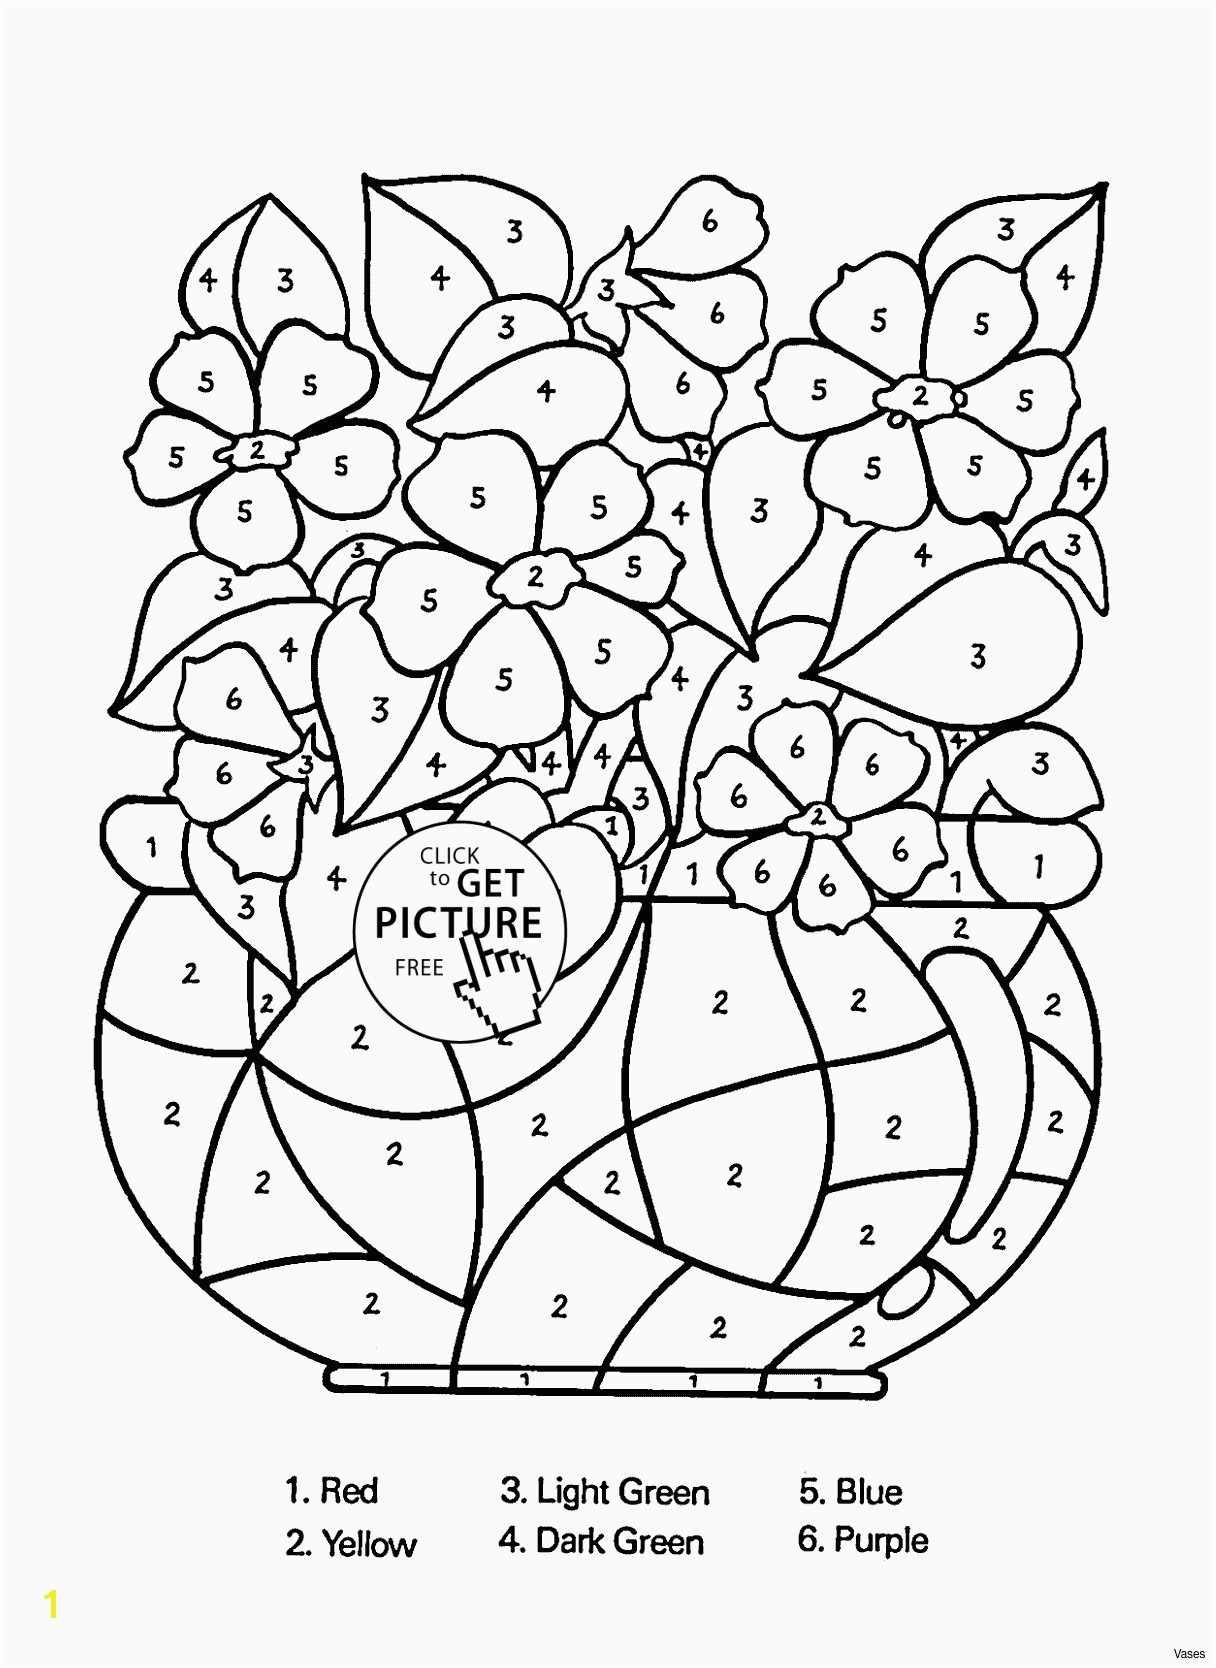 Sonoran Desert Coloring Pages Coloring Pages Christmas Archives Page 2 Of 3 Katesgrove